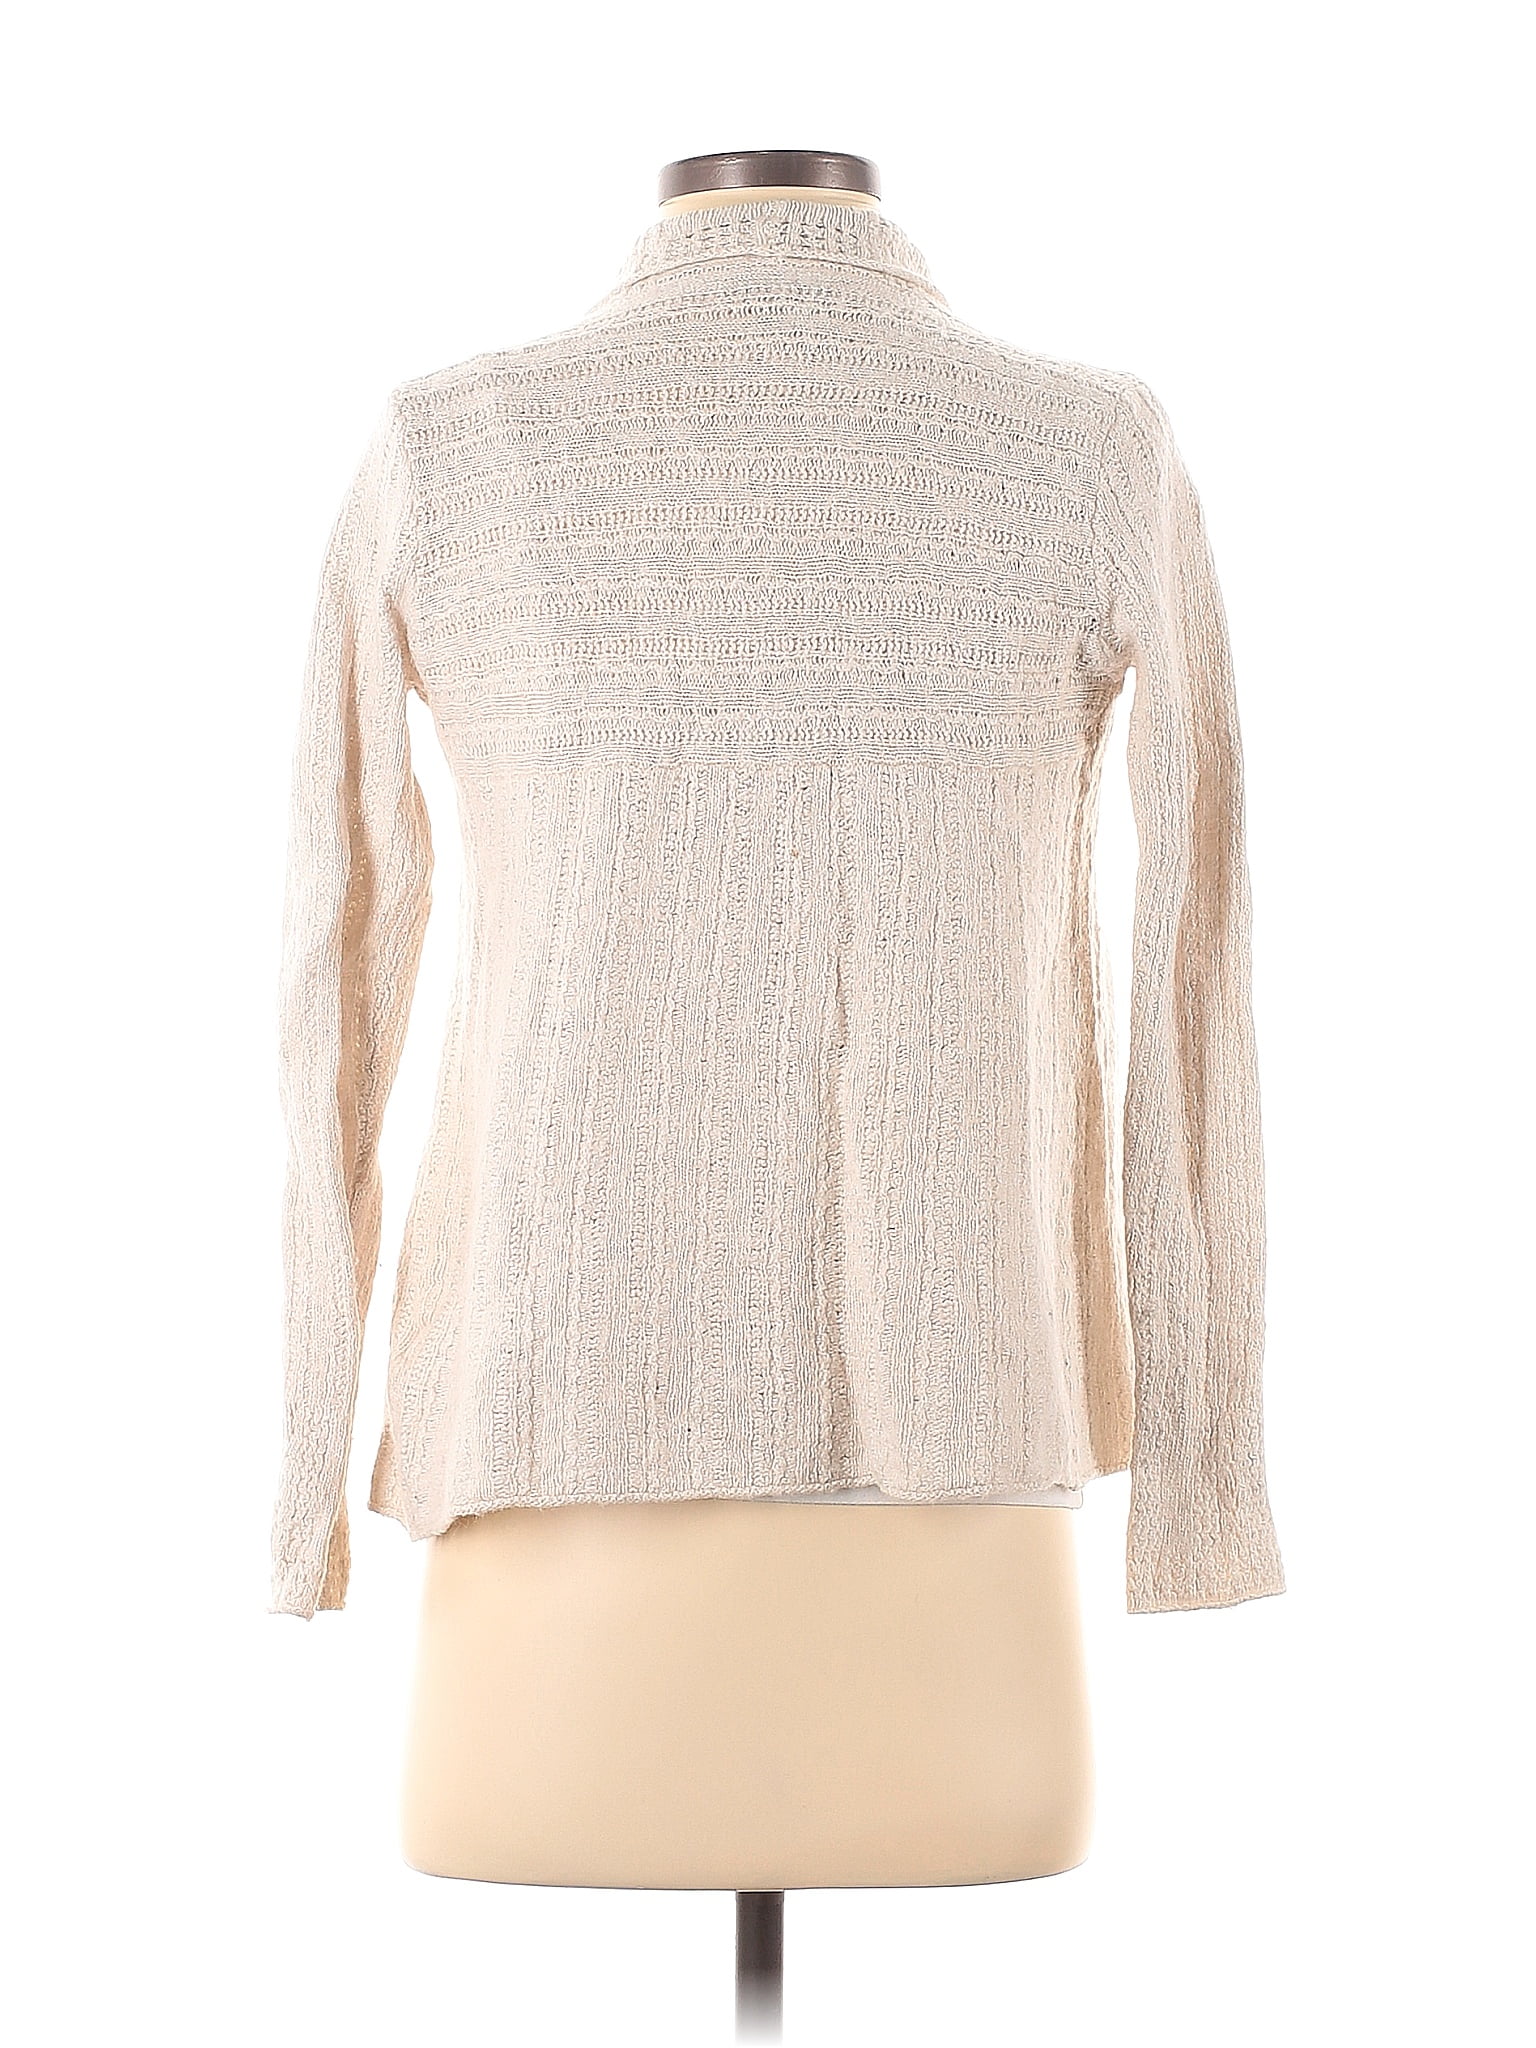 Lucky Brand Color Block Solid Ivory Cardigan Size M - 73% off